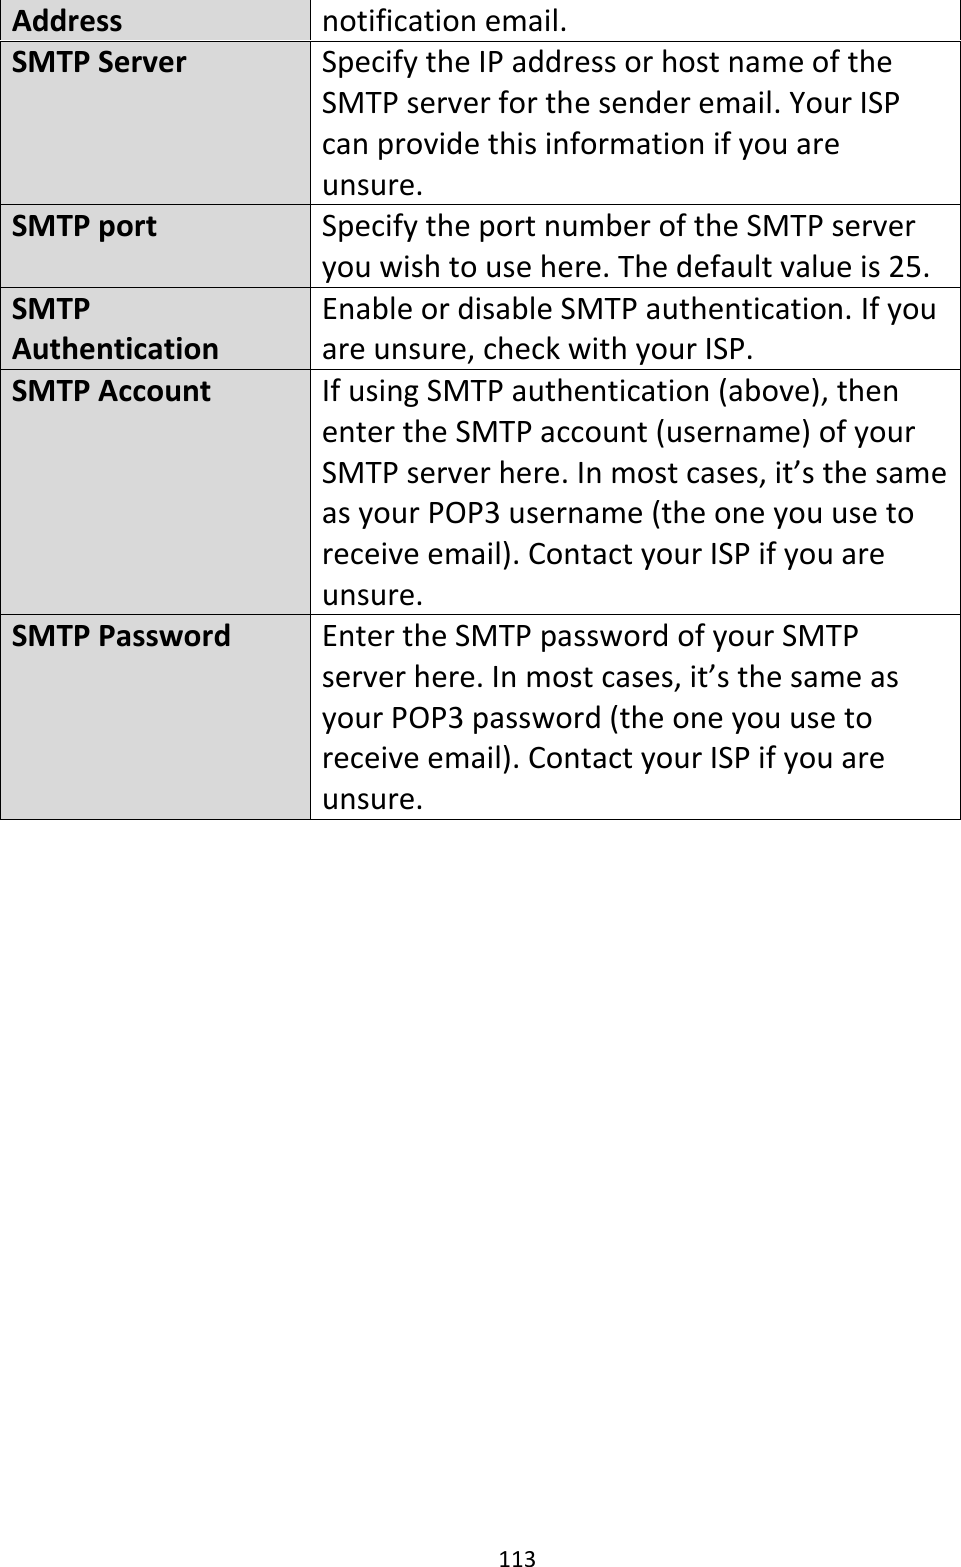 113  Address notification email. SMTP Server Specify the IP address or host name of the SMTP server for the sender email. Your ISP can provide this information if you are unsure. SMTP port Specify the port number of the SMTP server you wish to use here. The default value is 25. SMTP Authentication Enable or disable SMTP authentication. If you are unsure, check with your ISP. SMTP Account If using SMTP authentication (above), then enter the SMTP account (username) of your SMTP server here. In most cases, it’s the same as your POP3 username (the one you use to receive email). Contact your ISP if you are unsure. SMTP Password Enter the SMTP password of your SMTP server here. In most cases, it’s the same as your POP3 password (the one you use to receive email). Contact your ISP if you are unsure.  